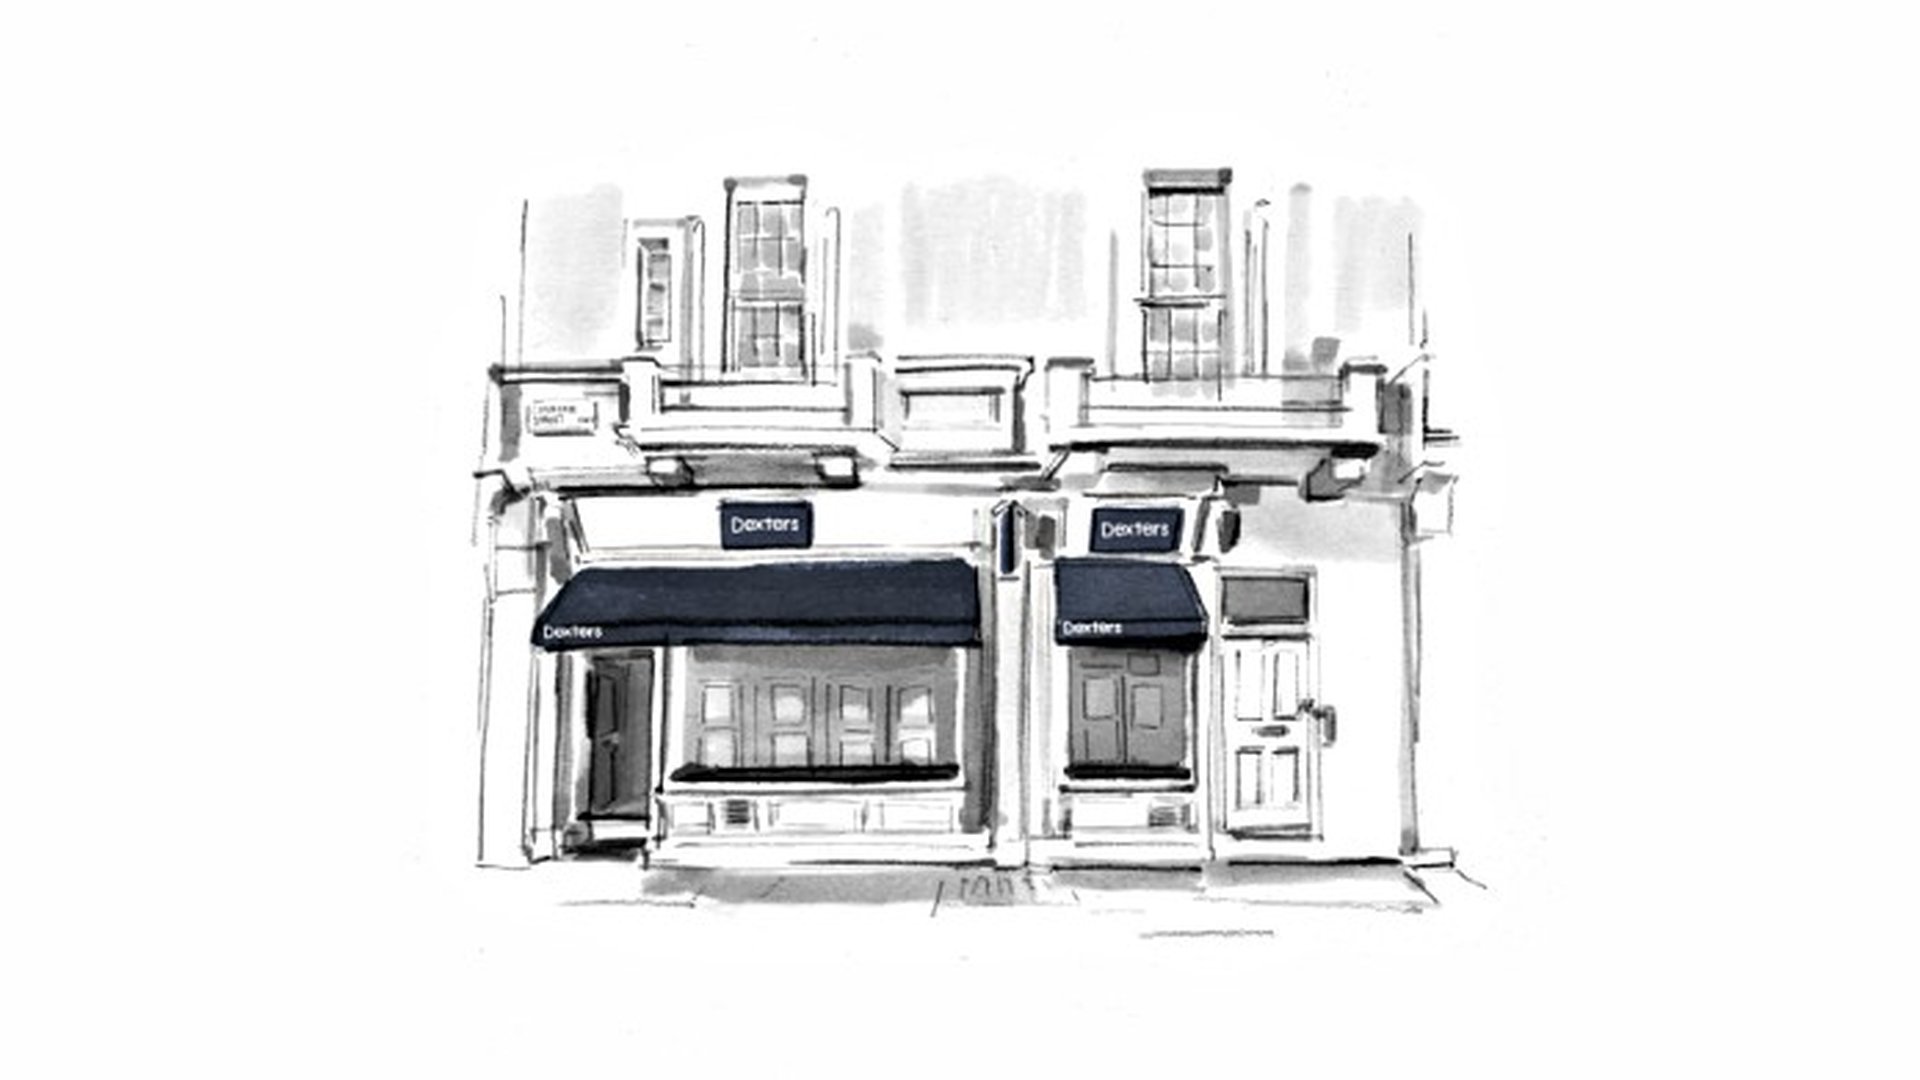 Dexters Estate Agents and Letting Agents in Pimlico